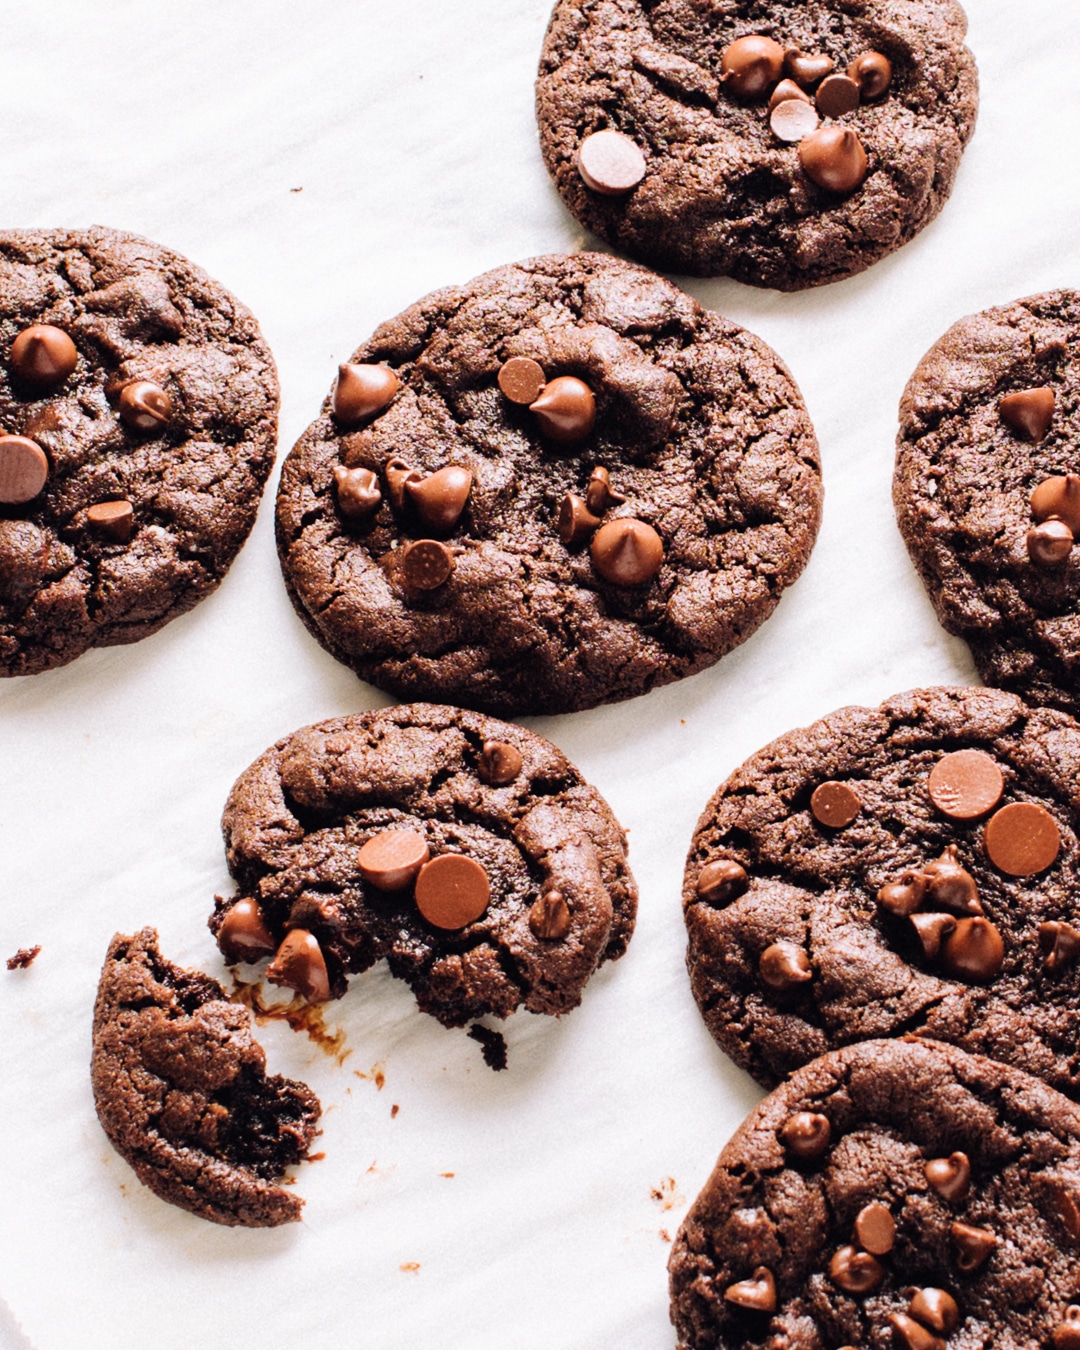 Mint Chocolate Cookies (So Rich and Fudgy)